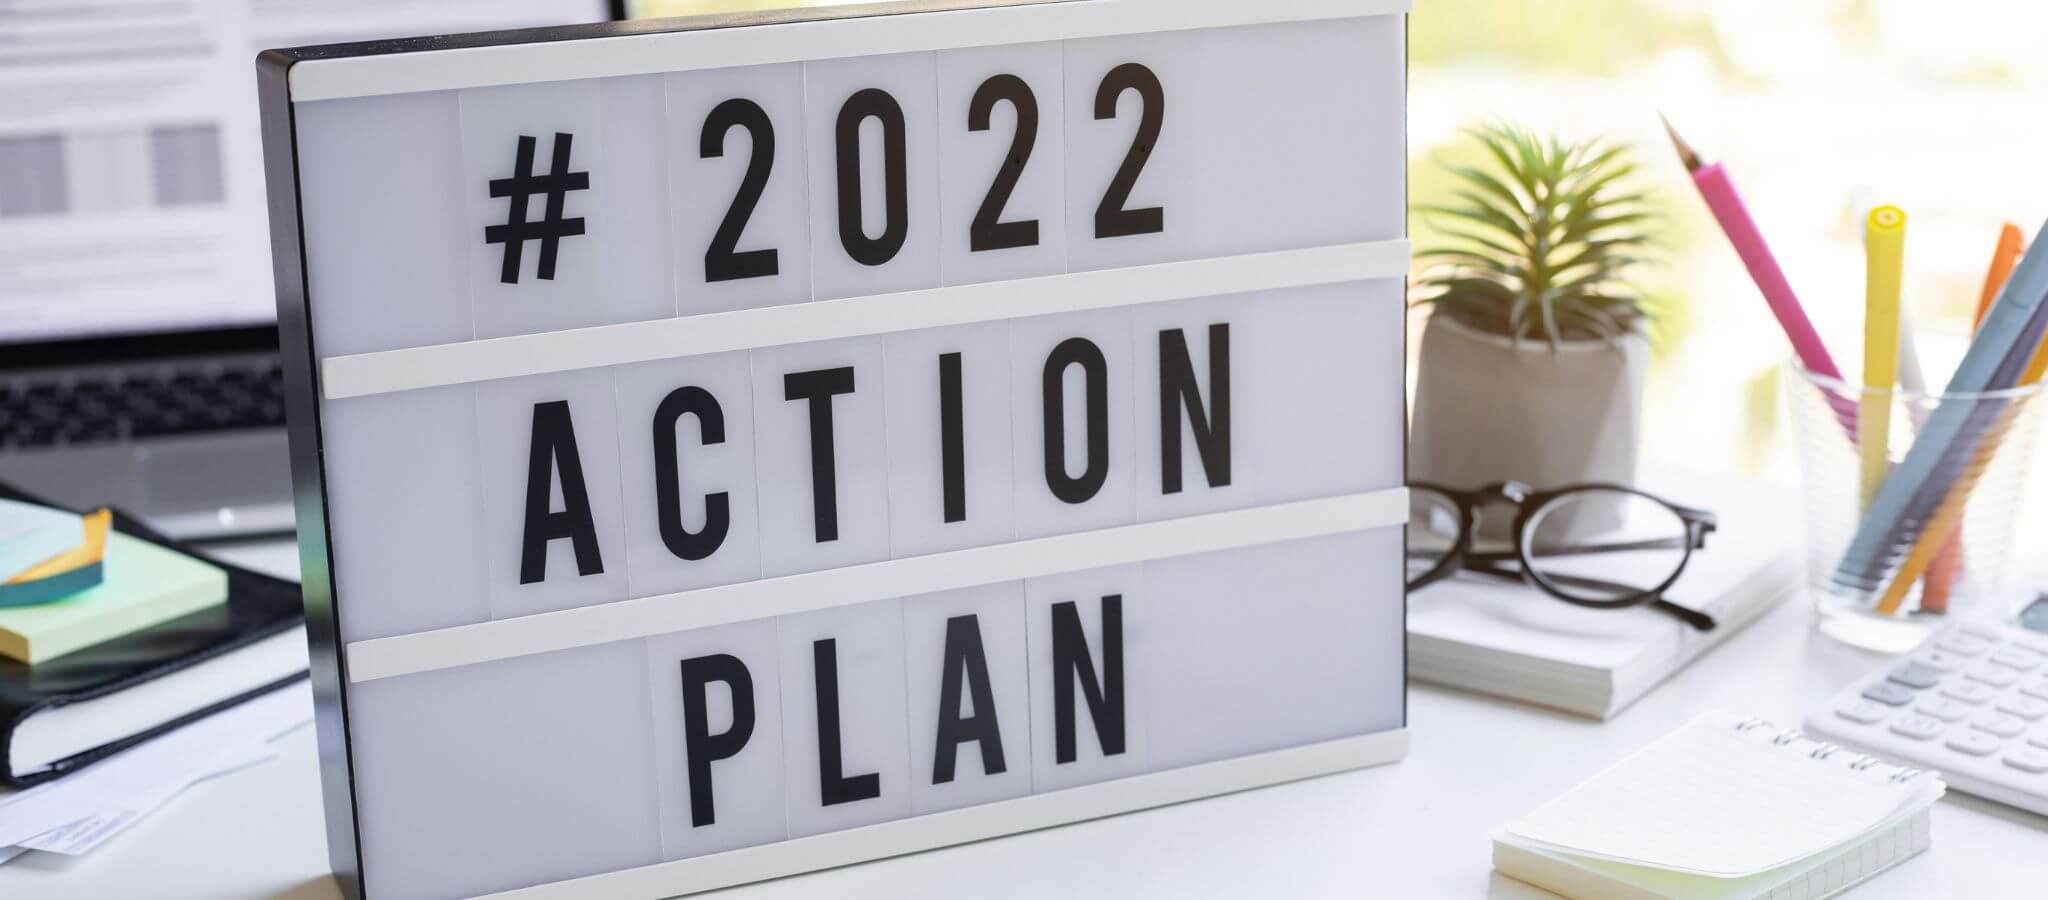 2022 resolutions action plan